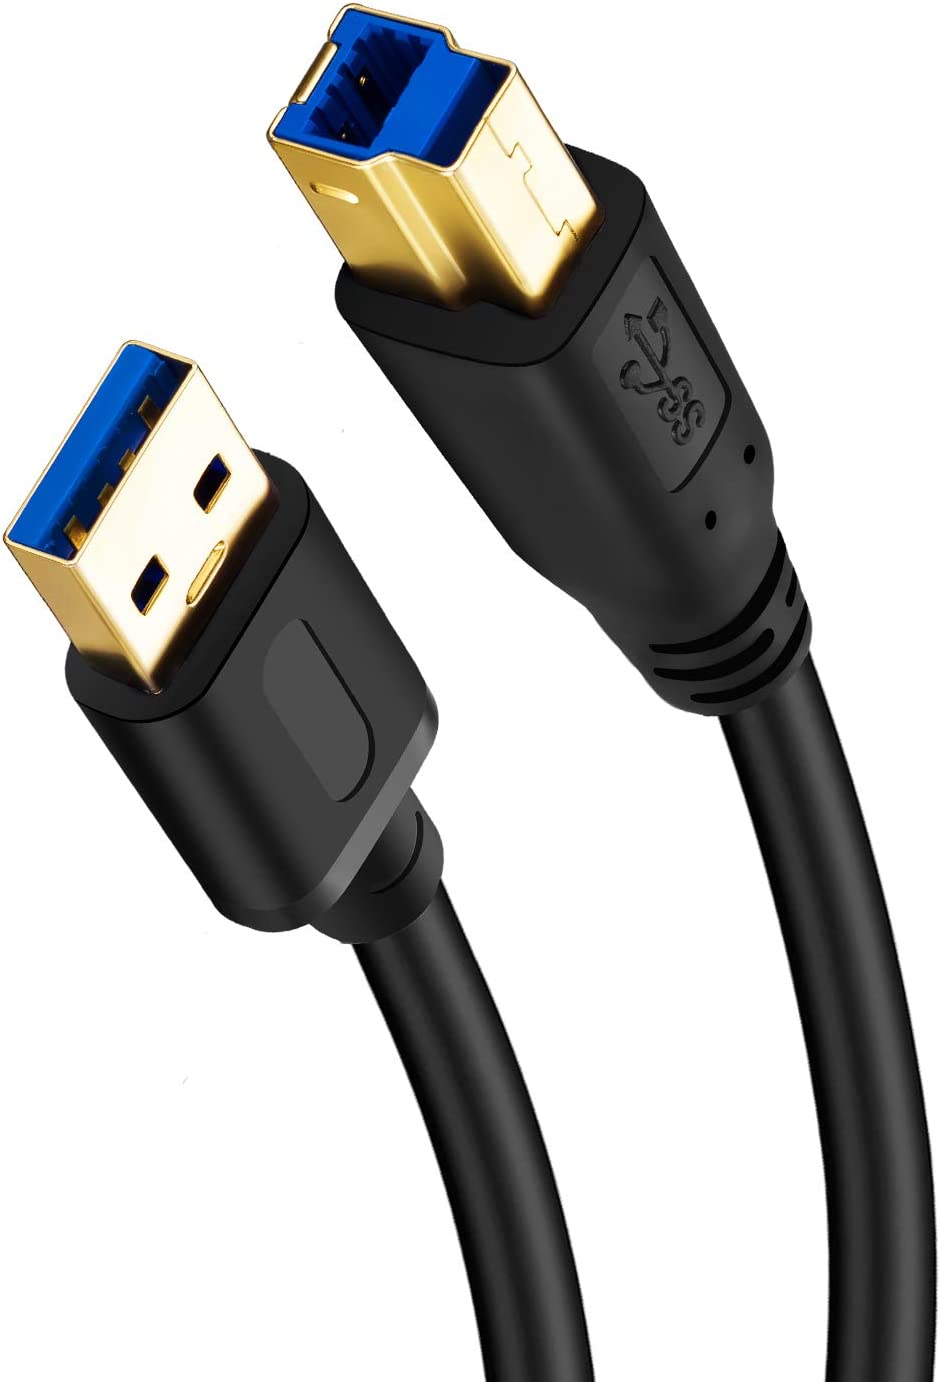 USB 3.0 Cable A Male to B 3.0